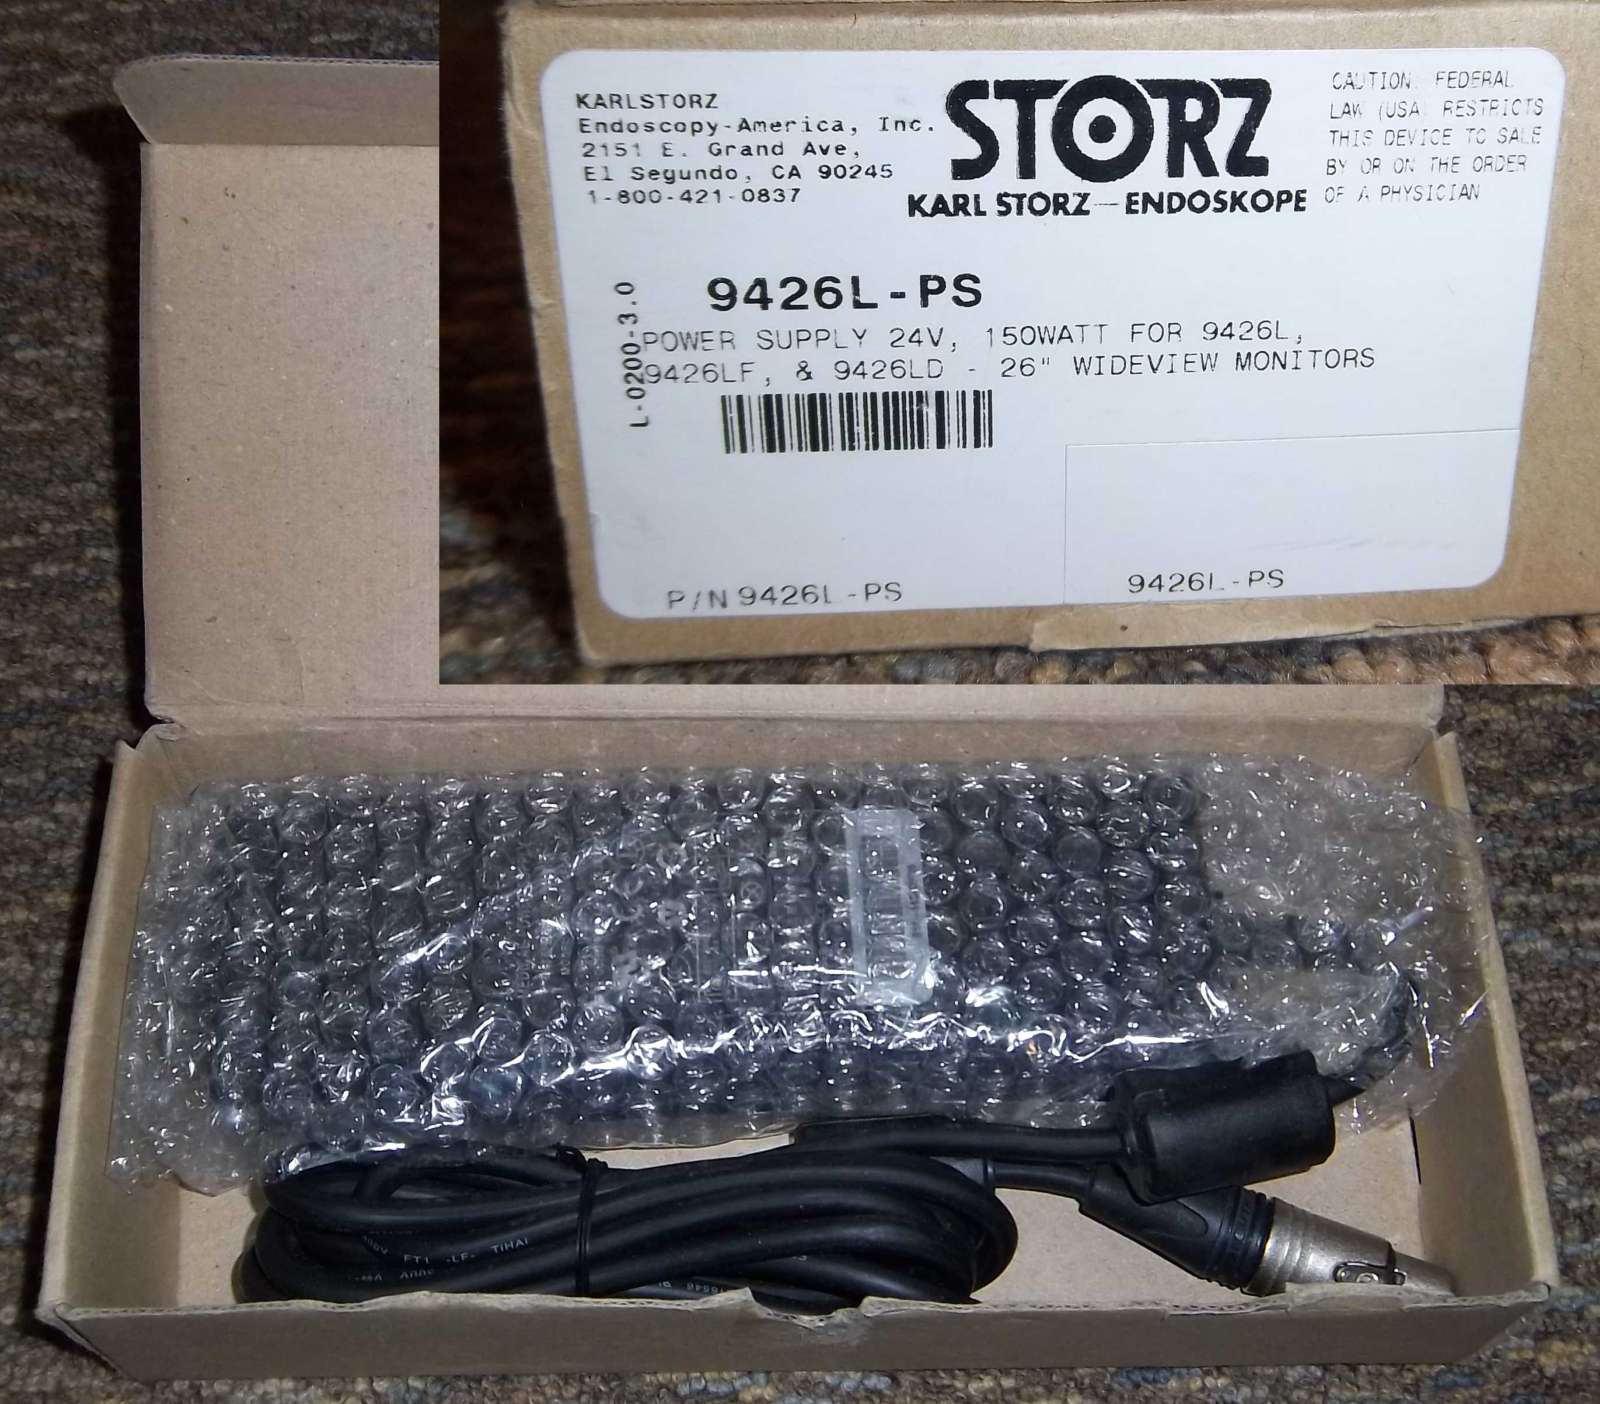 Karl Storz 9426L-PS supply for 9426L LED monitor Karl Storz 9426L-PS power supply 9426L LED Power Supply 24V 150 Watt for 9426L lf Ld Manufacturer Karl Storz Manufacturer SKU 9426L-PS Karl Storz 9426L 26 in 26 inch Wideview HD LED High Bright Monitor